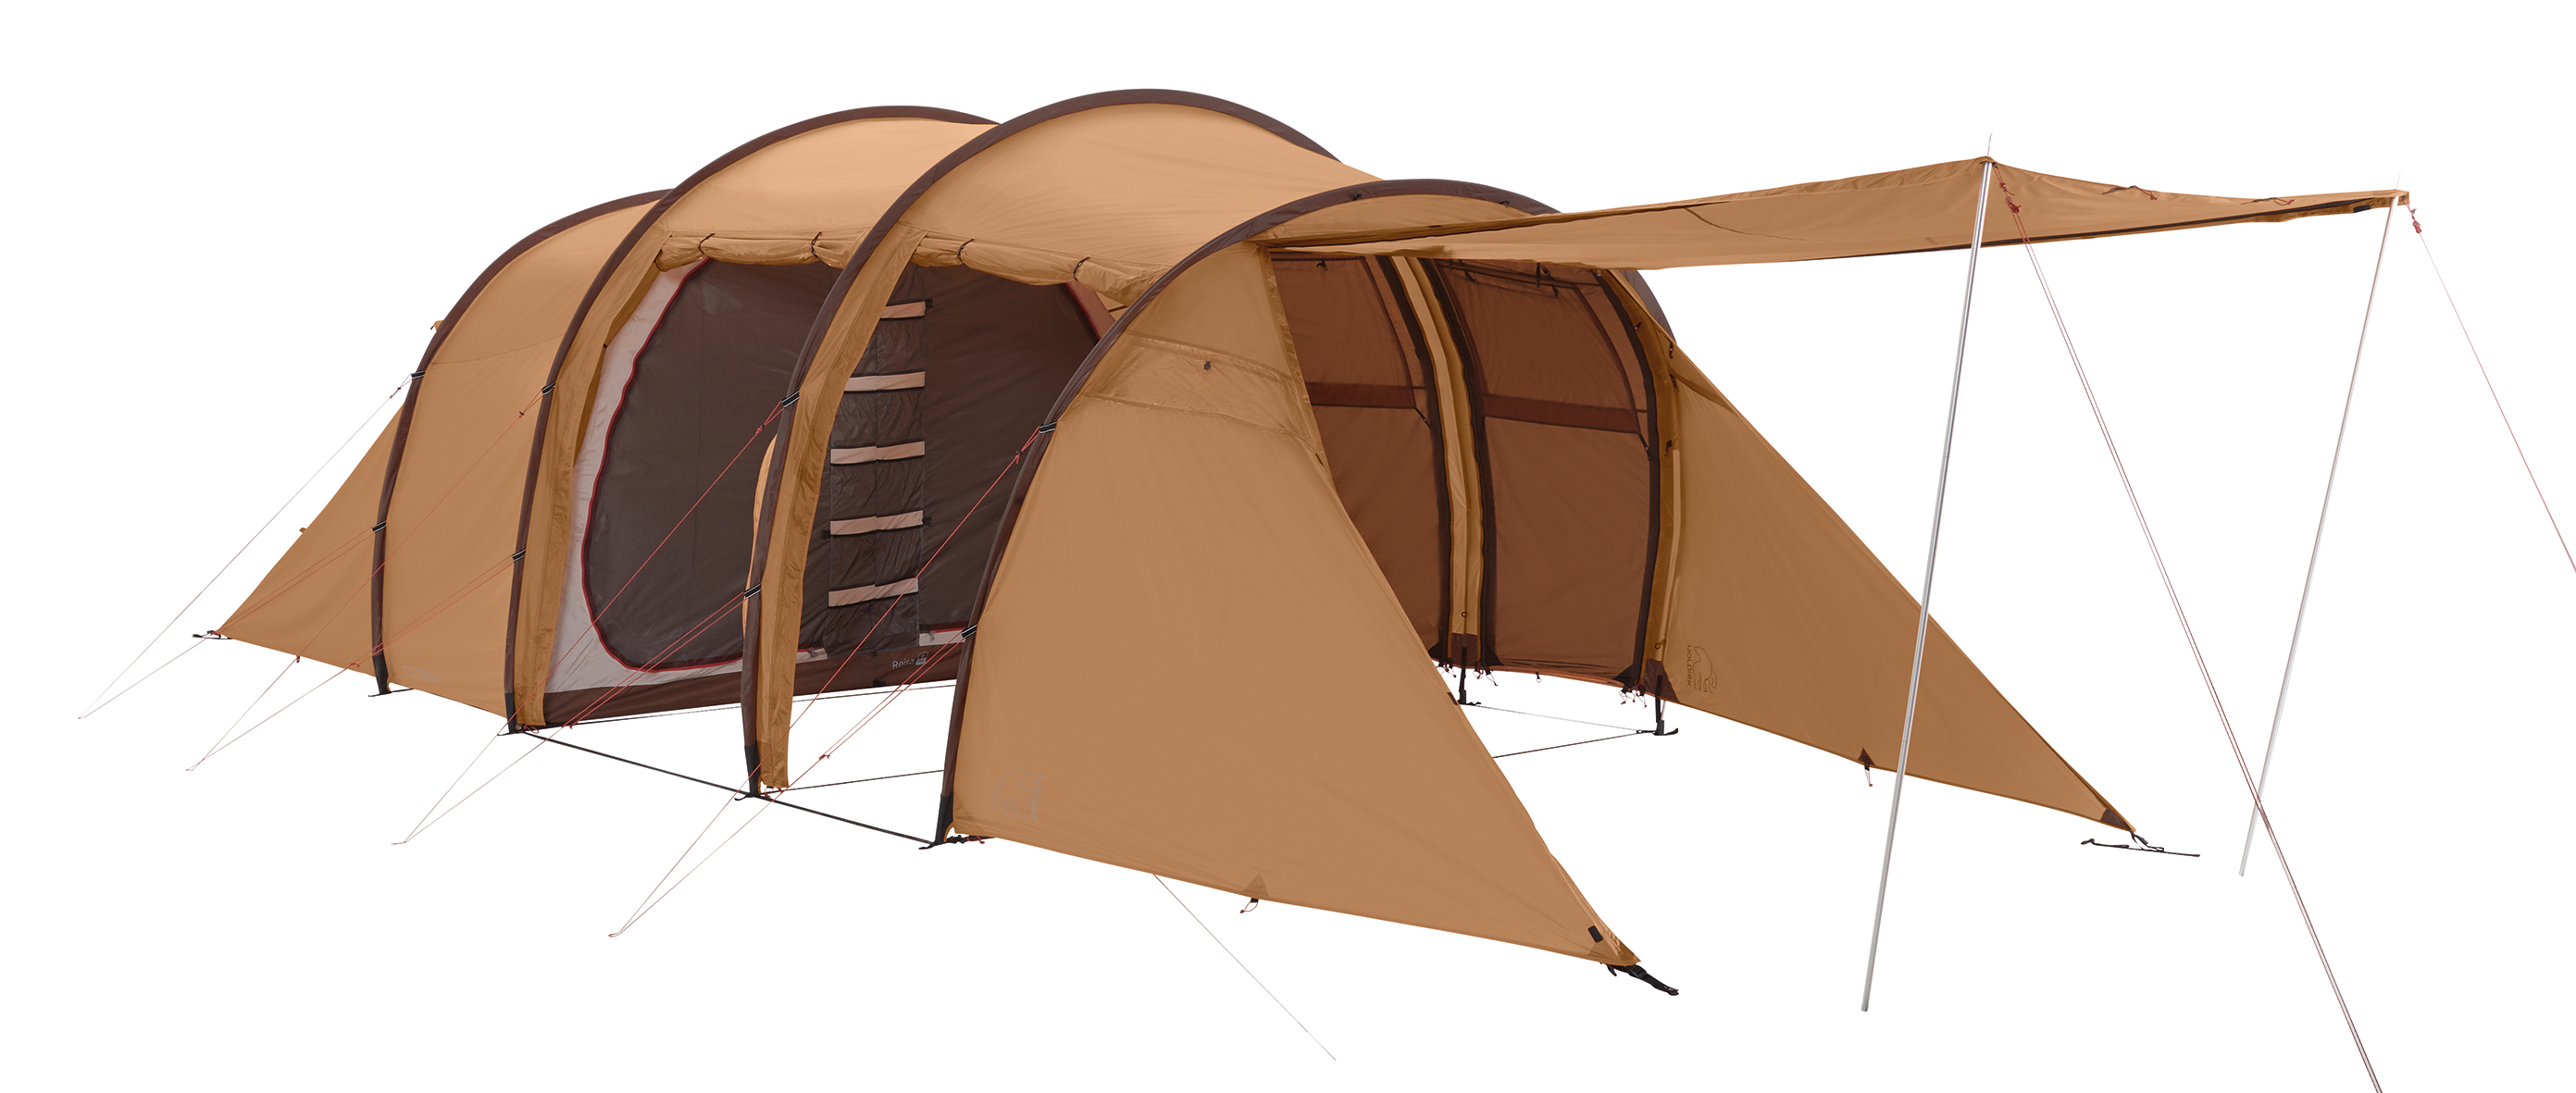 Nordisk Reisa 6 PU group tunnel tent | Recon Company